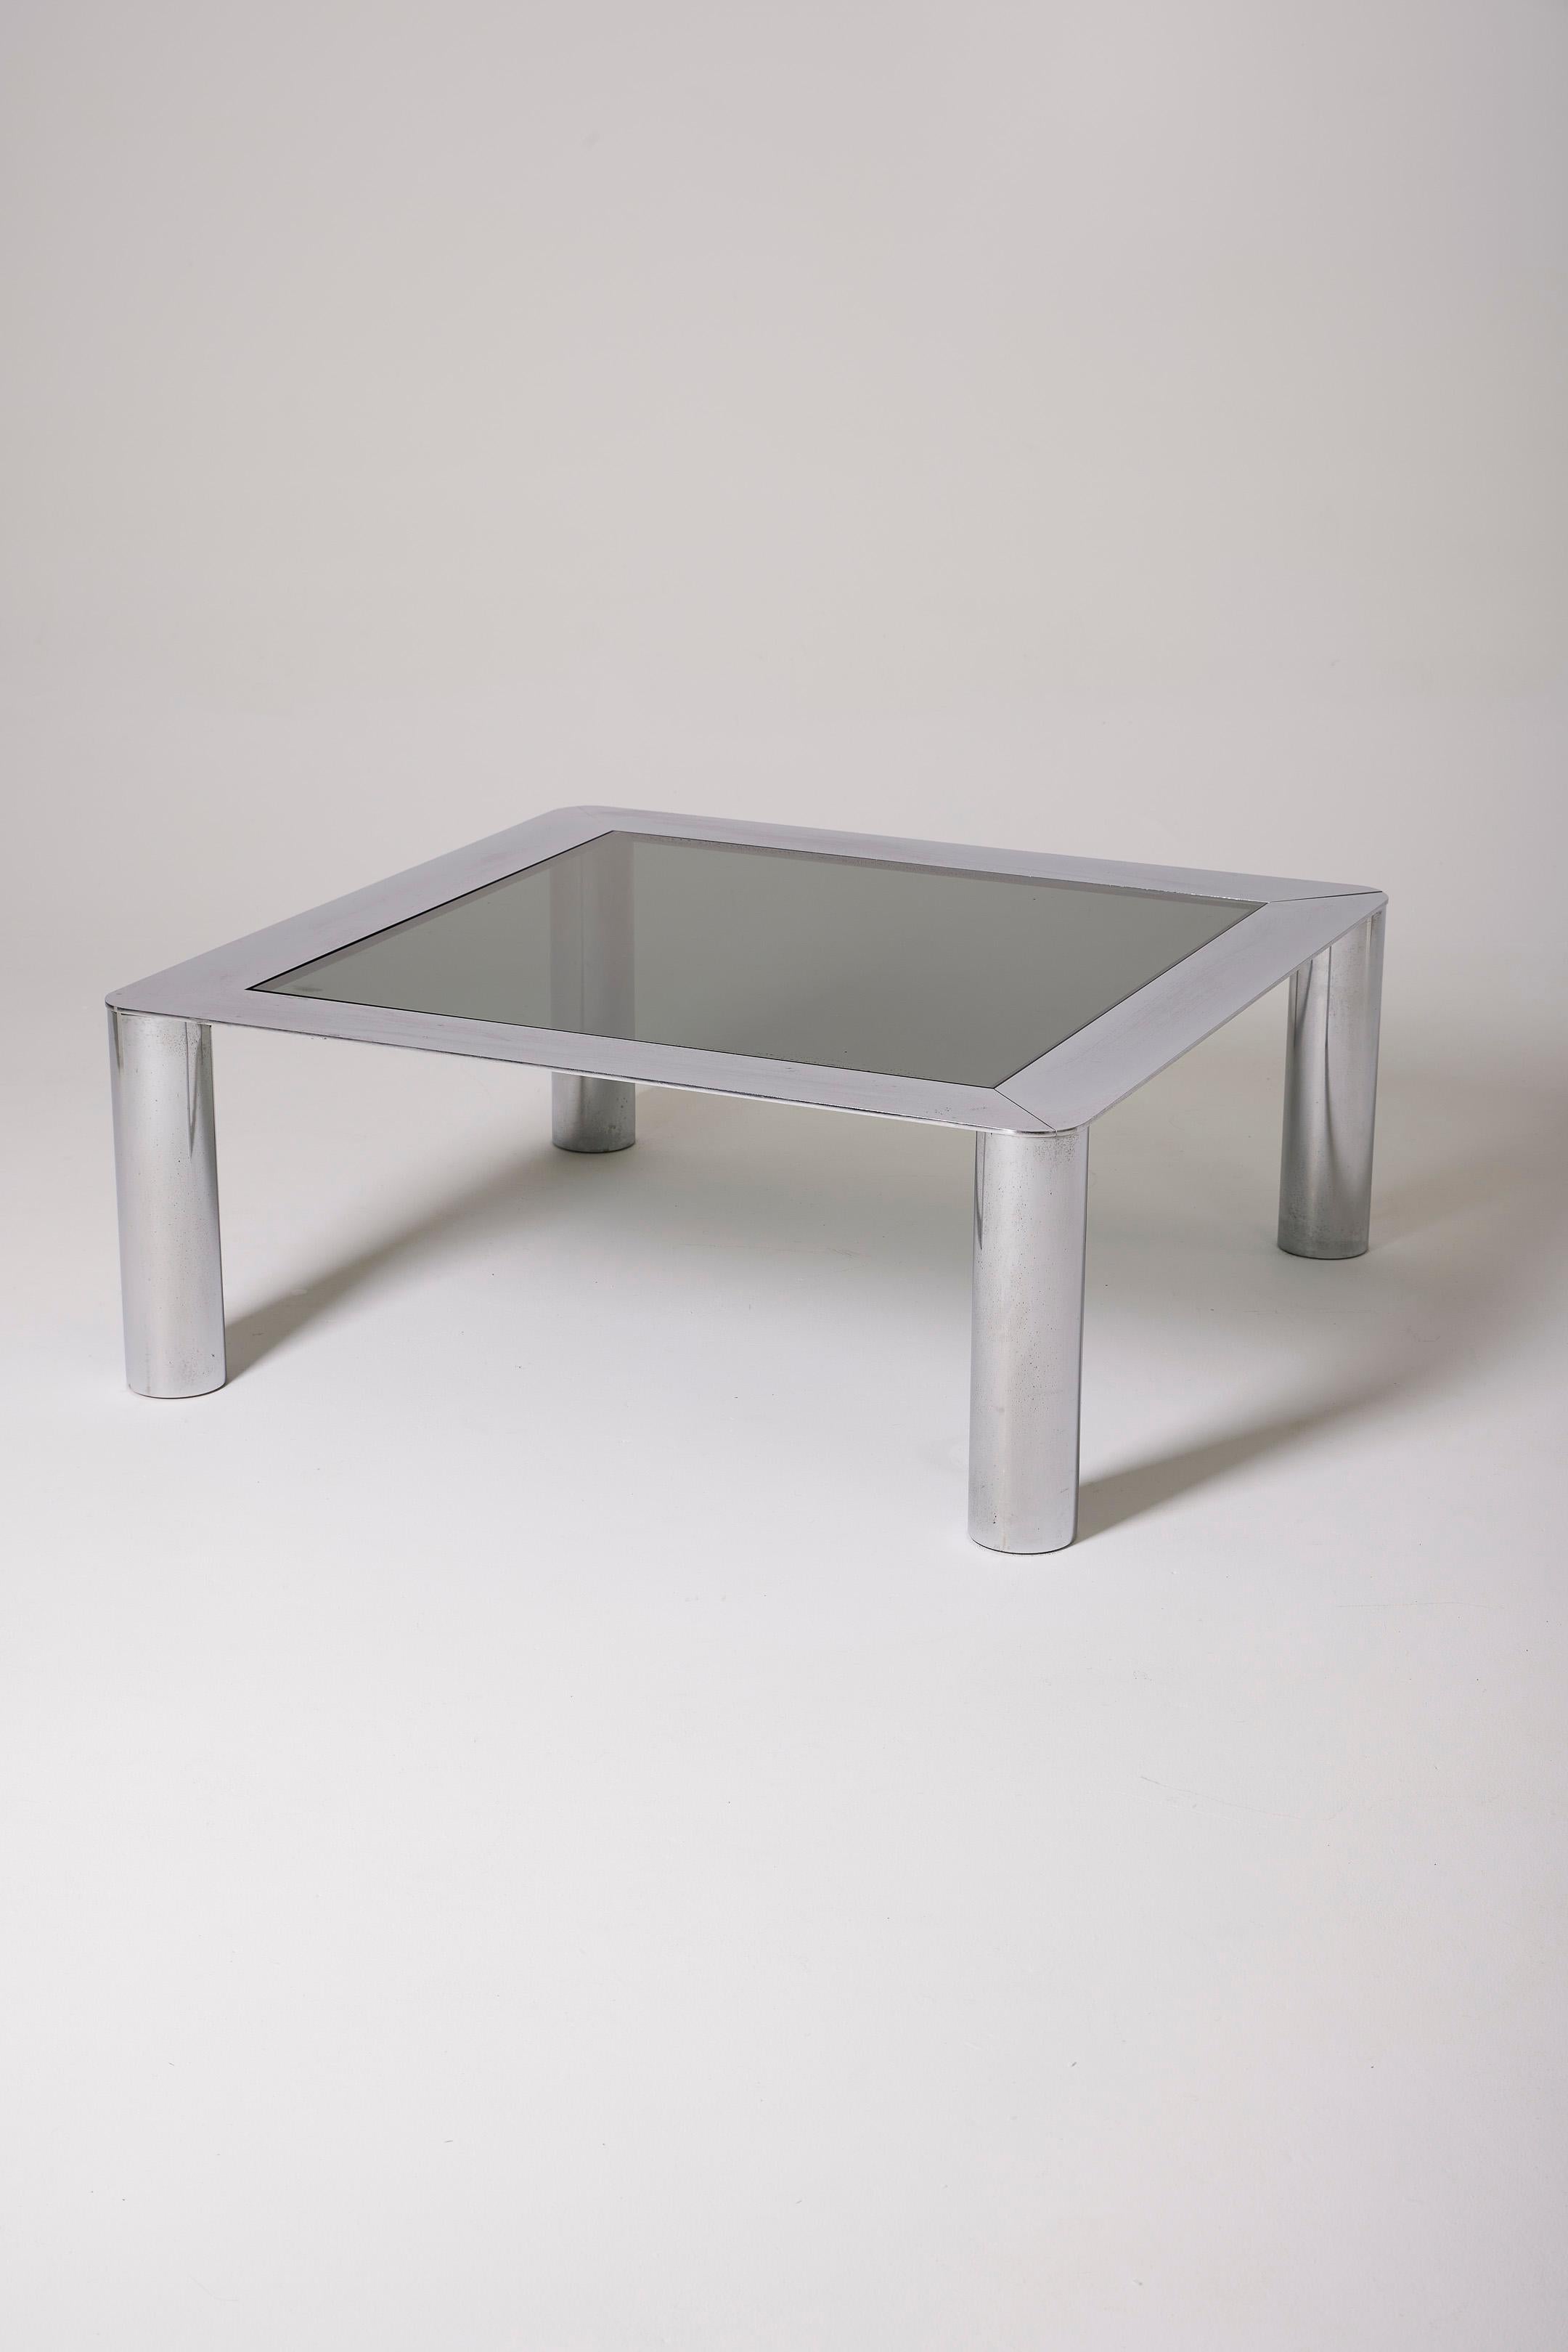  Coffee table by Italian designer Sergio Mazza for Cinova in the 1970s. The top is made of smoked glass and the structure is in chrome metal. Good condition. Mazza was famous for his contributions to the design of lighting fixtures and furniture